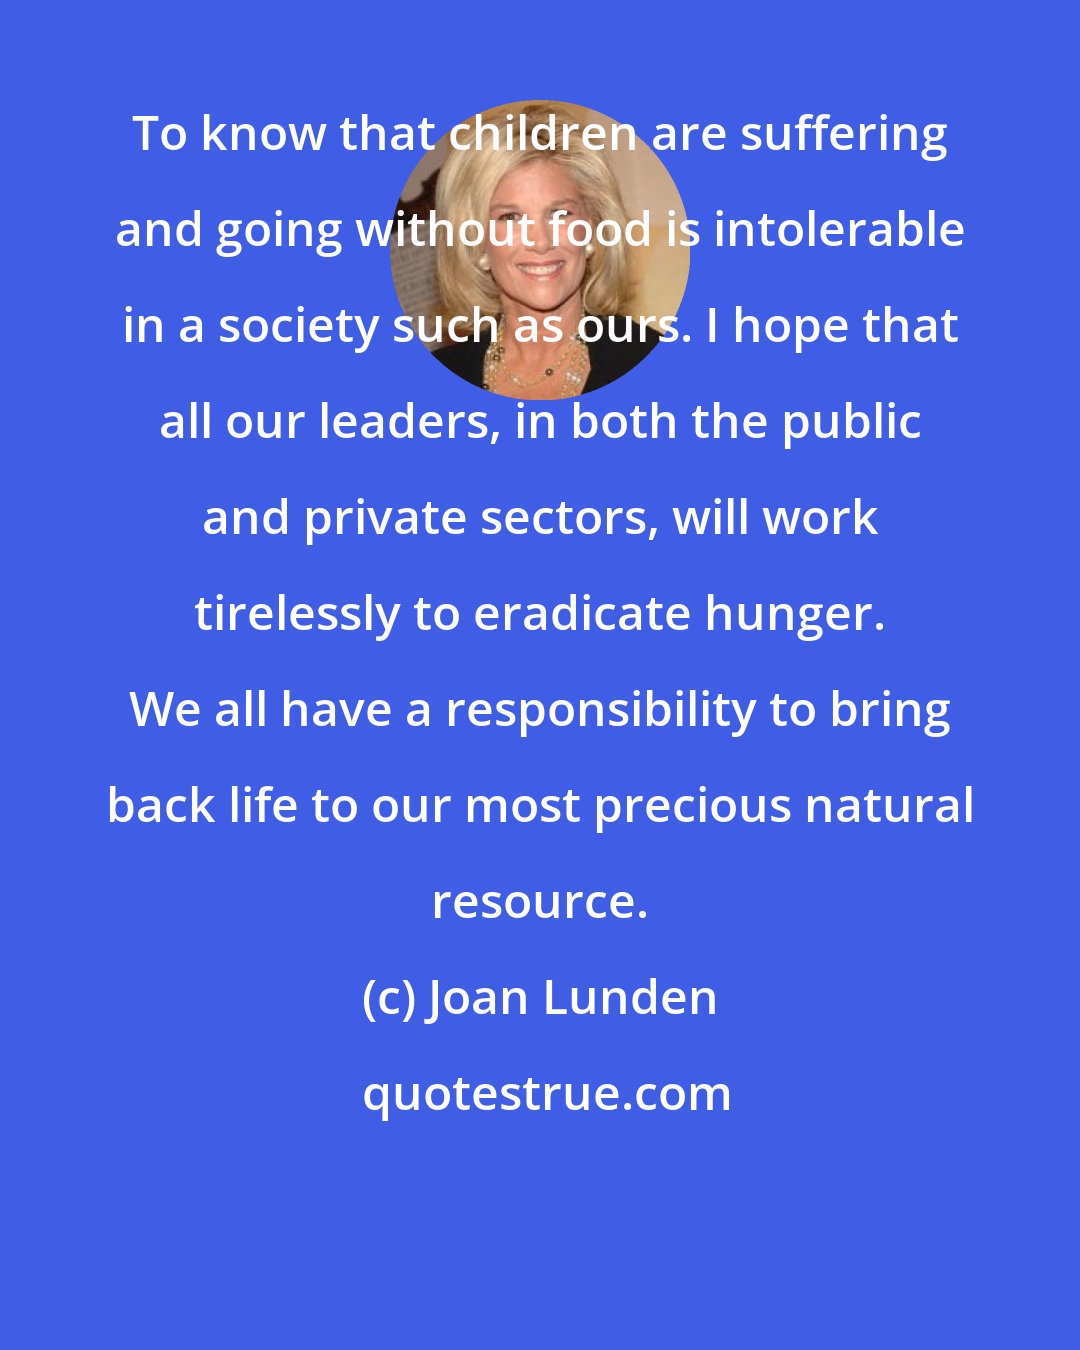 Joan Lunden: To know that children are suffering and going without food is intolerable in a society such as ours. I hope that all our leaders, in both the public and private sectors, will work tirelessly to eradicate hunger. We all have a responsibility to bring back life to our most precious natural resource.